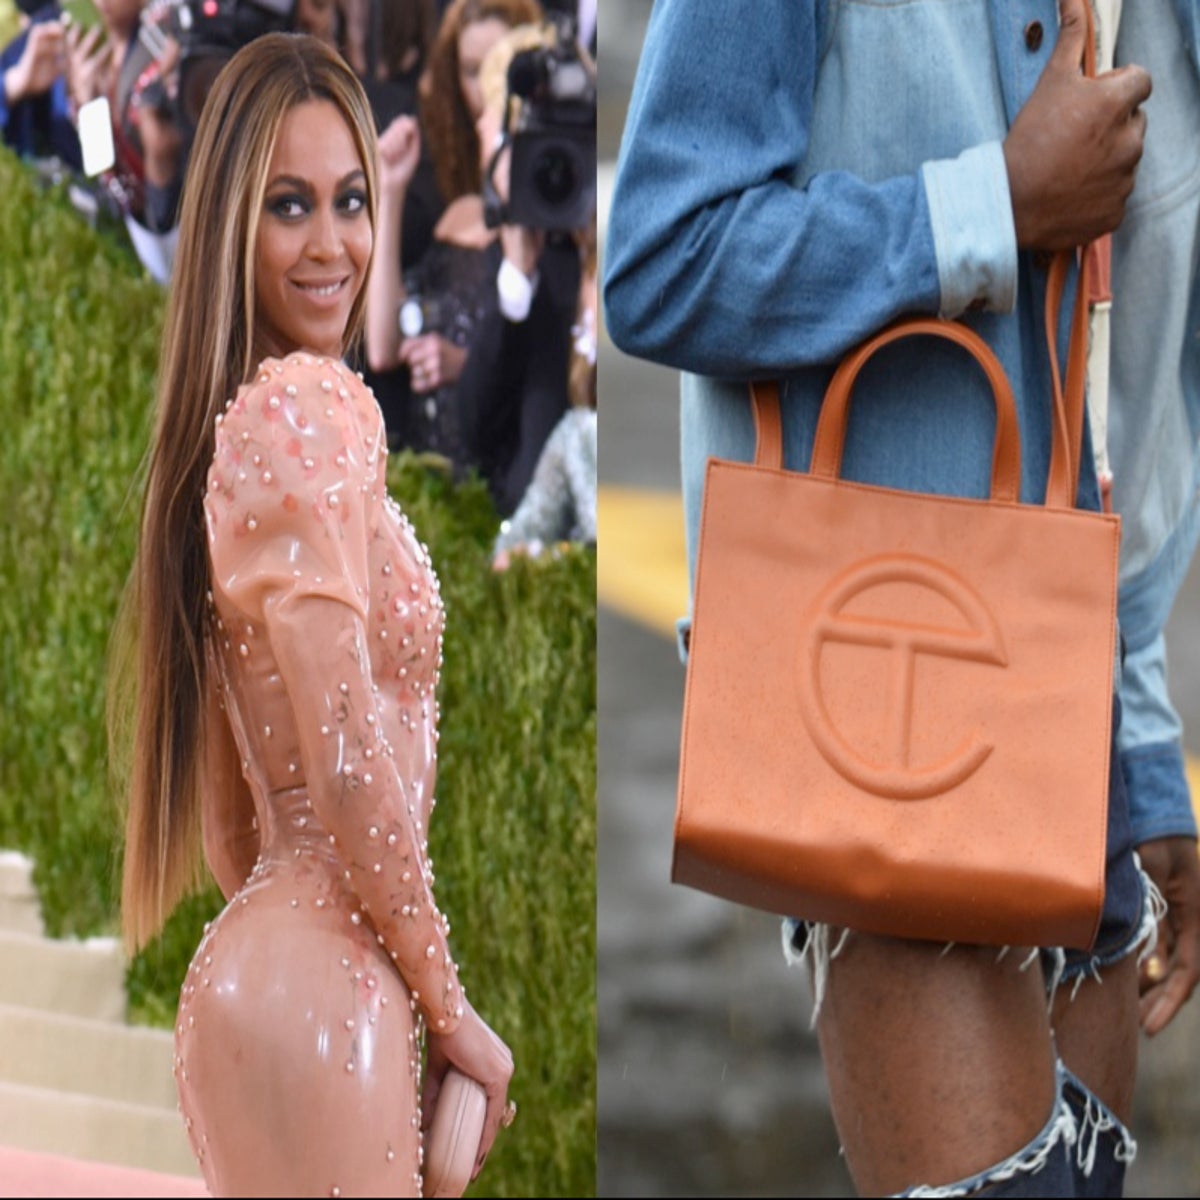 Why Beyoncé Swapped Her Birkin Bag with a Vegan Leather Tote